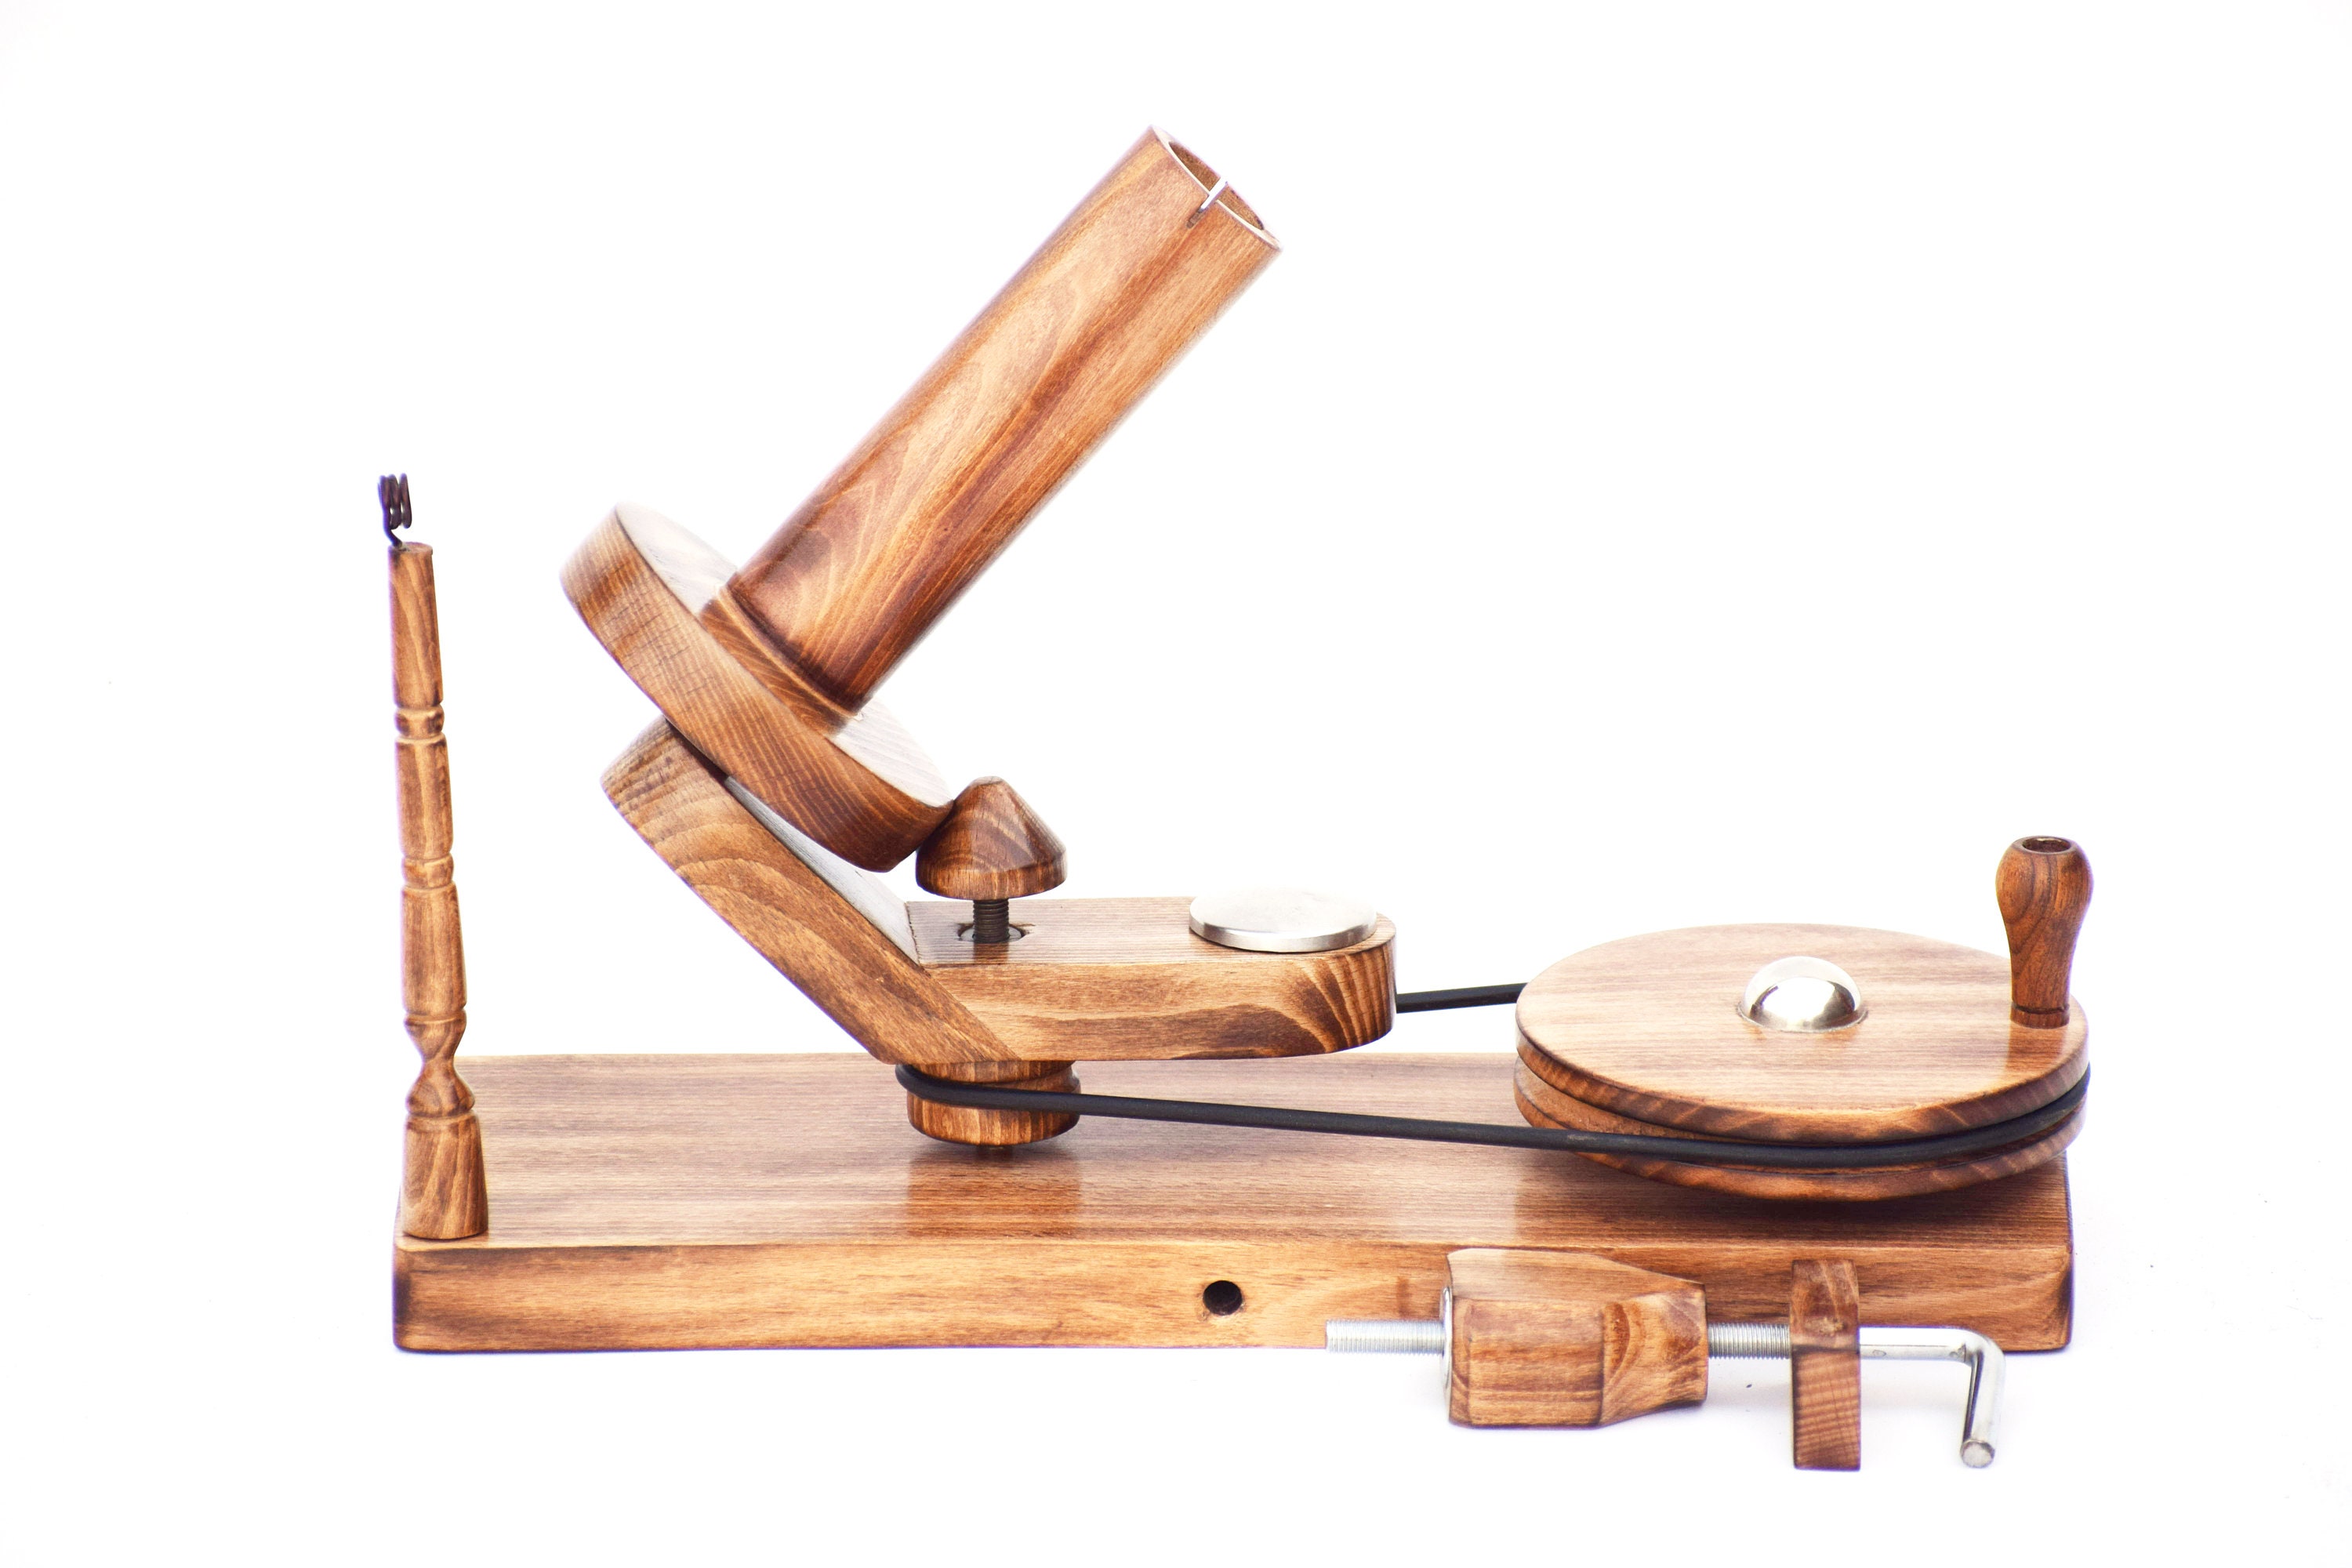 SAWI Wooden Yarn Winder for Knitting and Crocheting